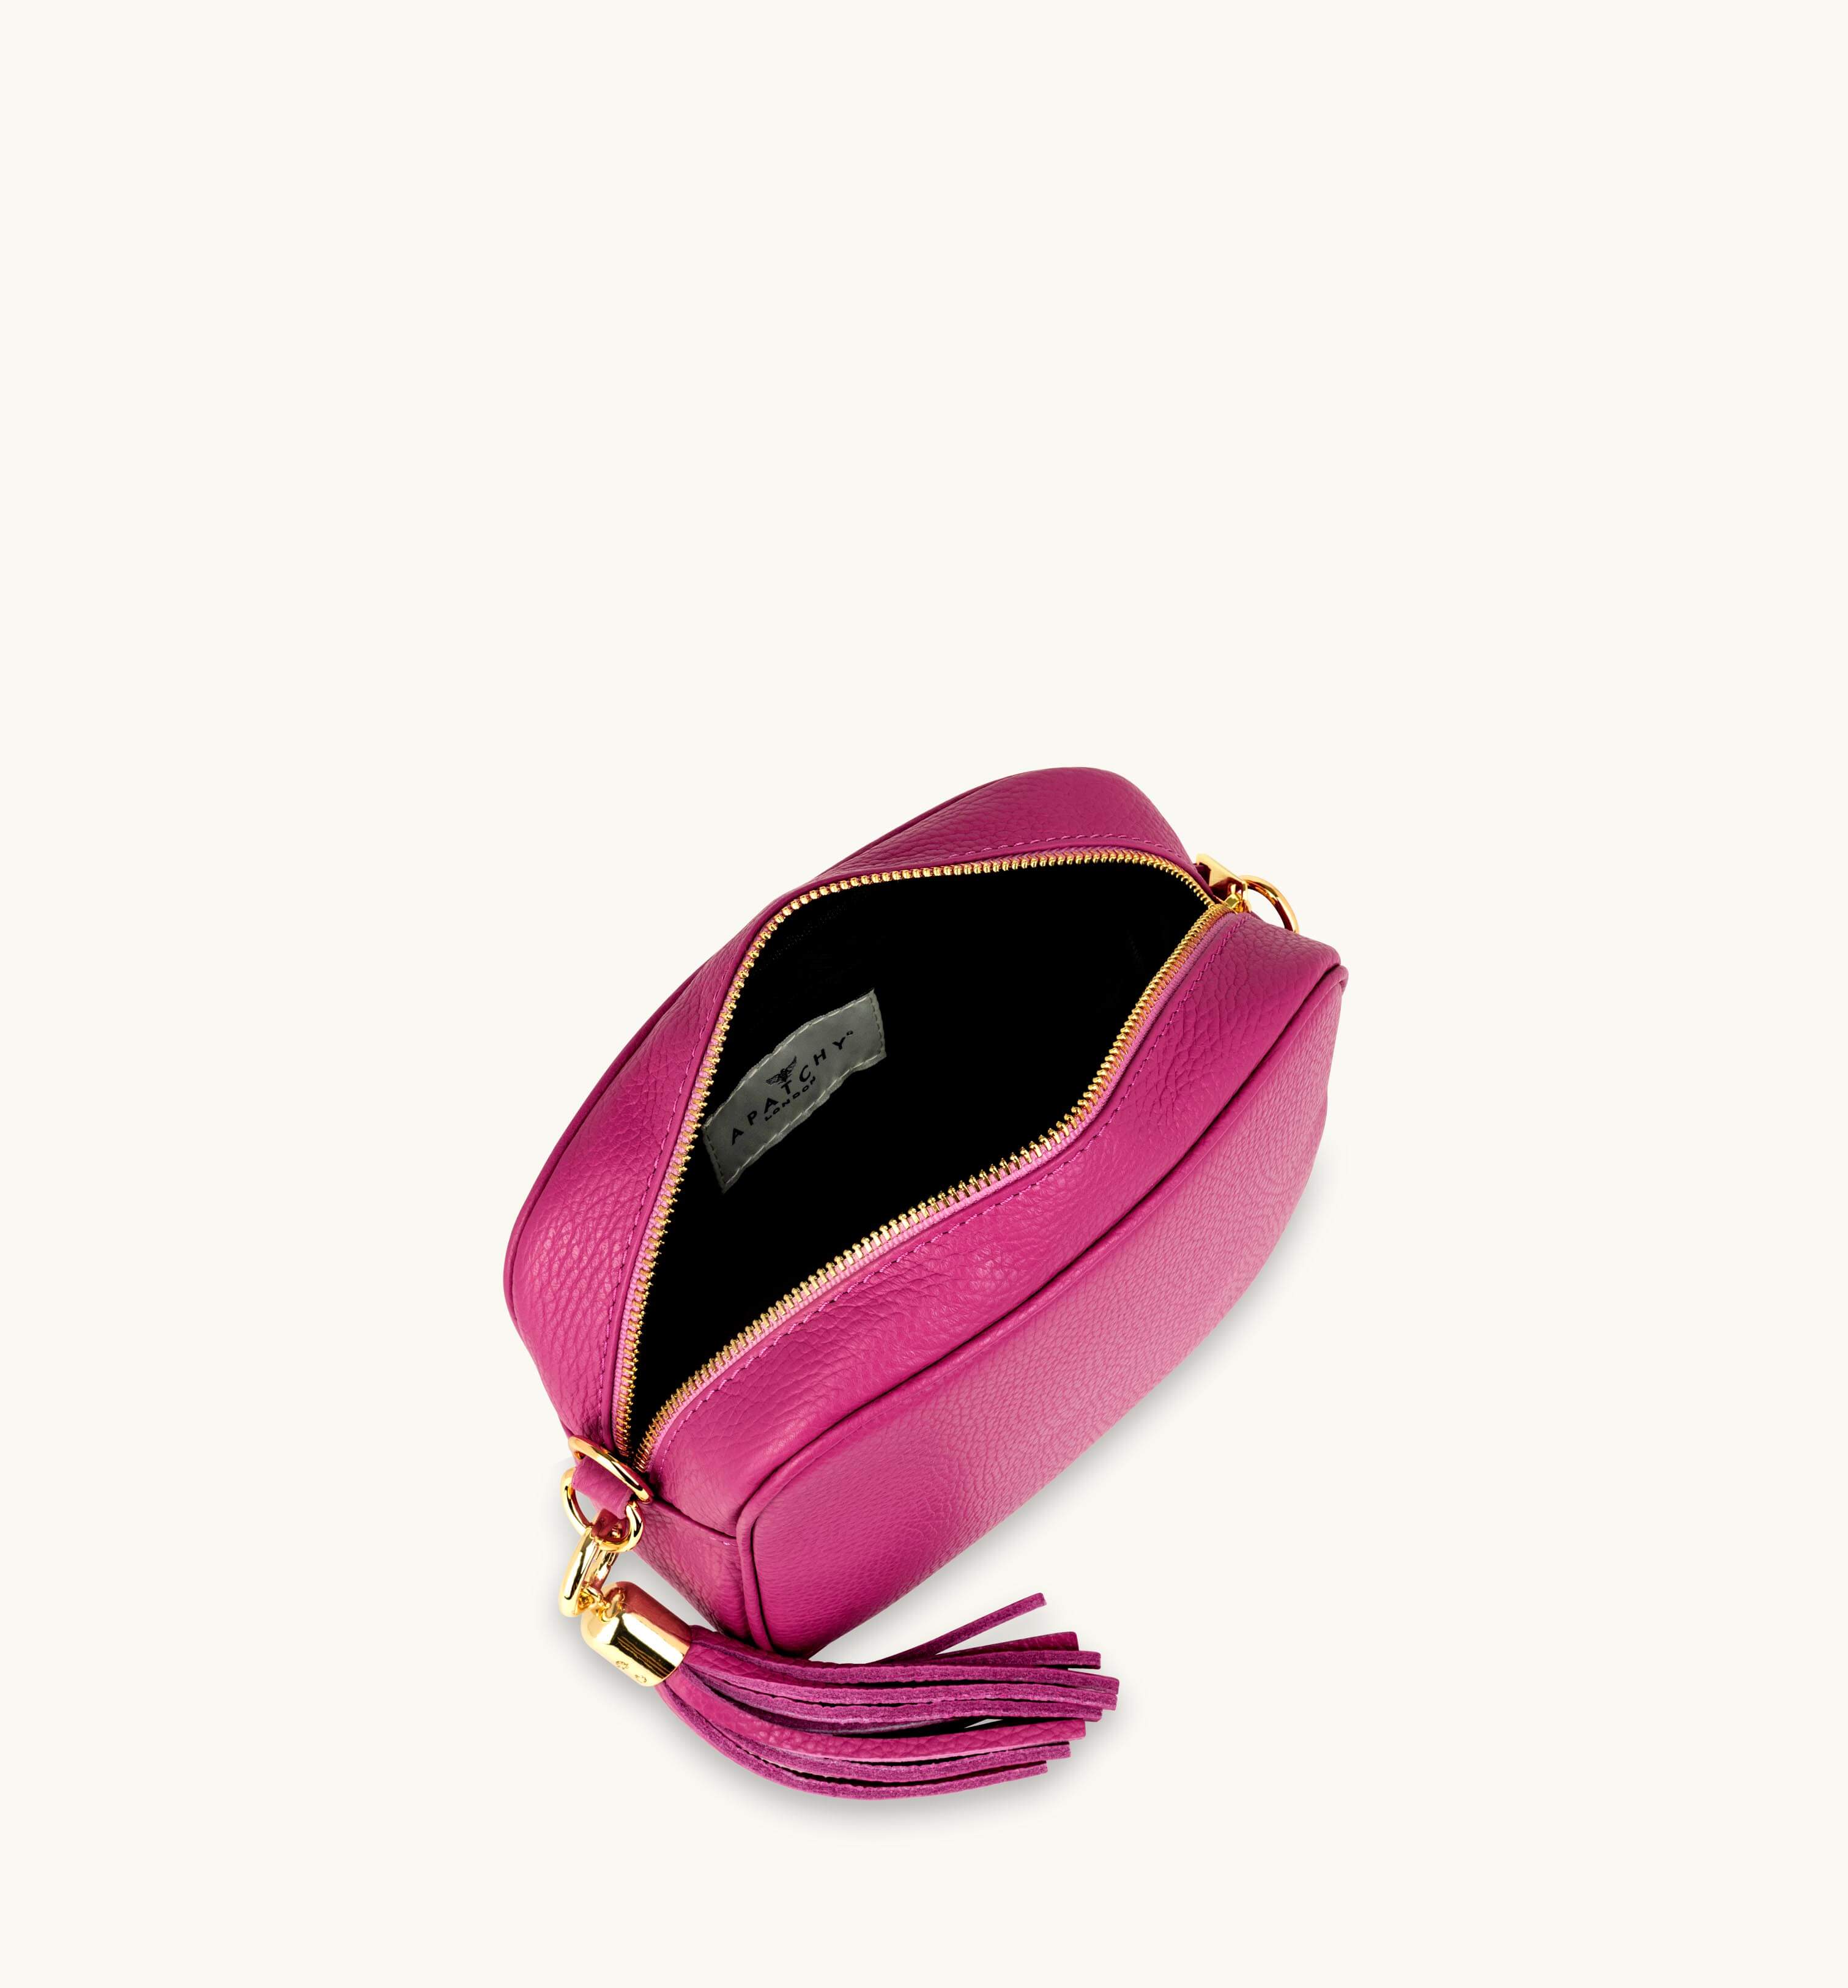 The Tassel Barbie Pink Leather Crossbody Bag With Gold Chain Strap